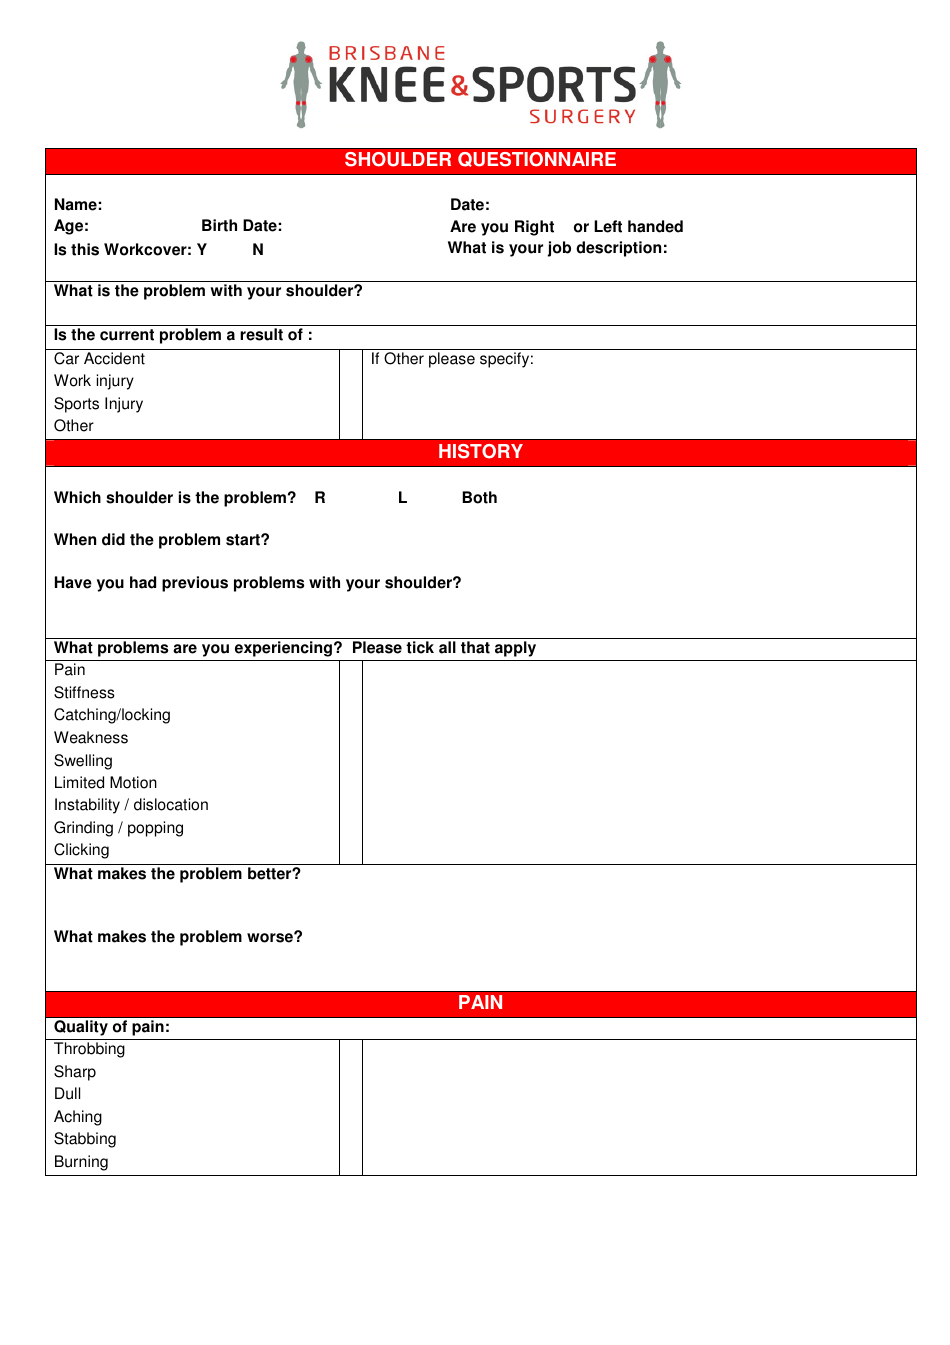 Image preview of the Shoulder Questionnaire document